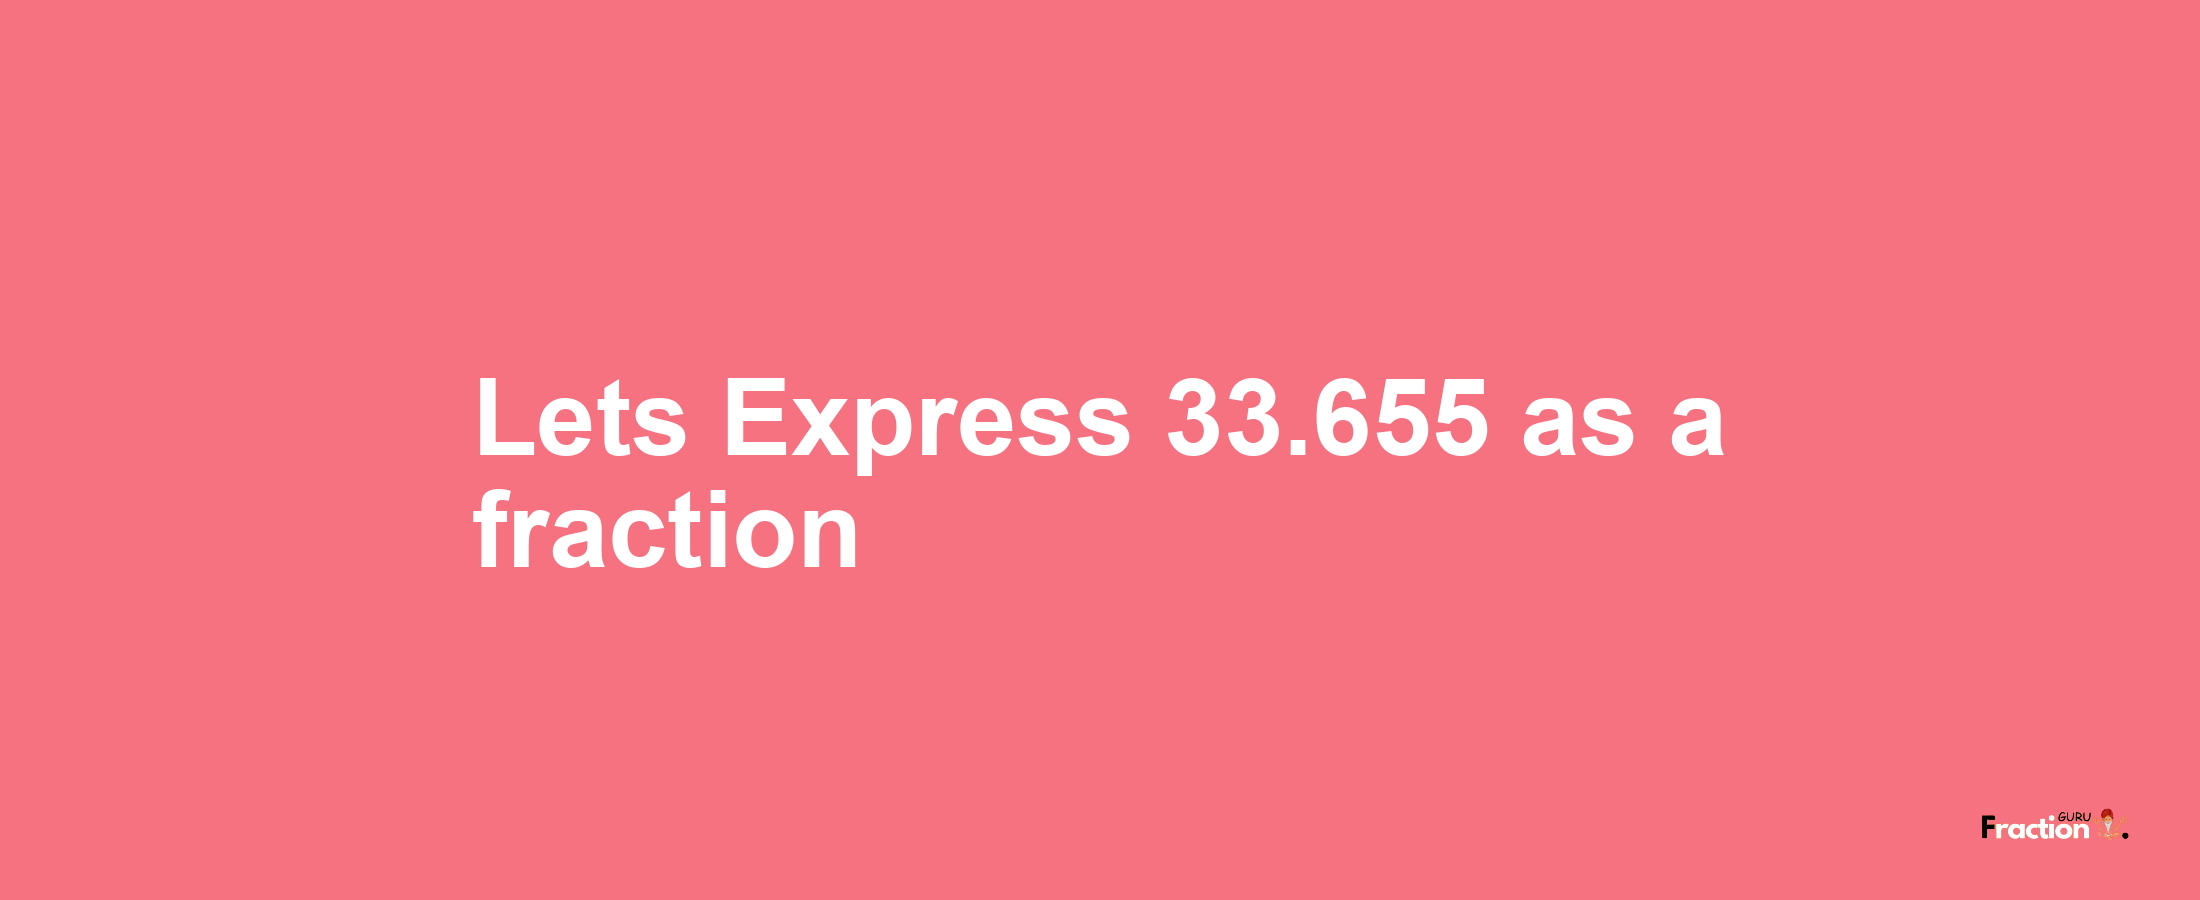 Lets Express 33.655 as afraction